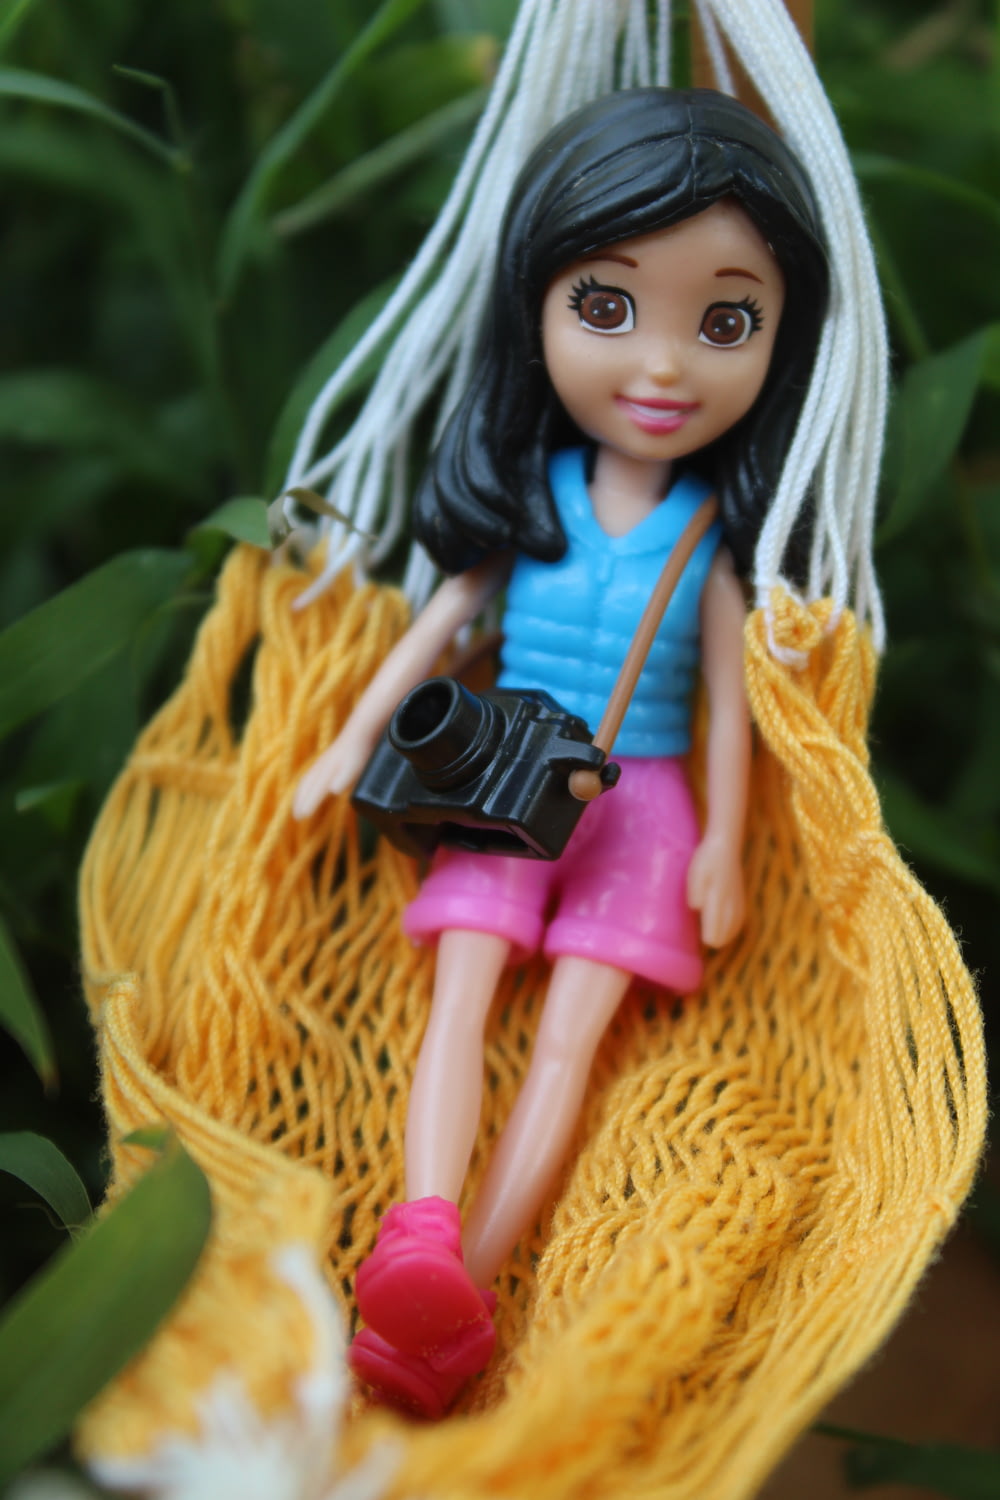 girl wearing blue tank top and shorts doll on hammock